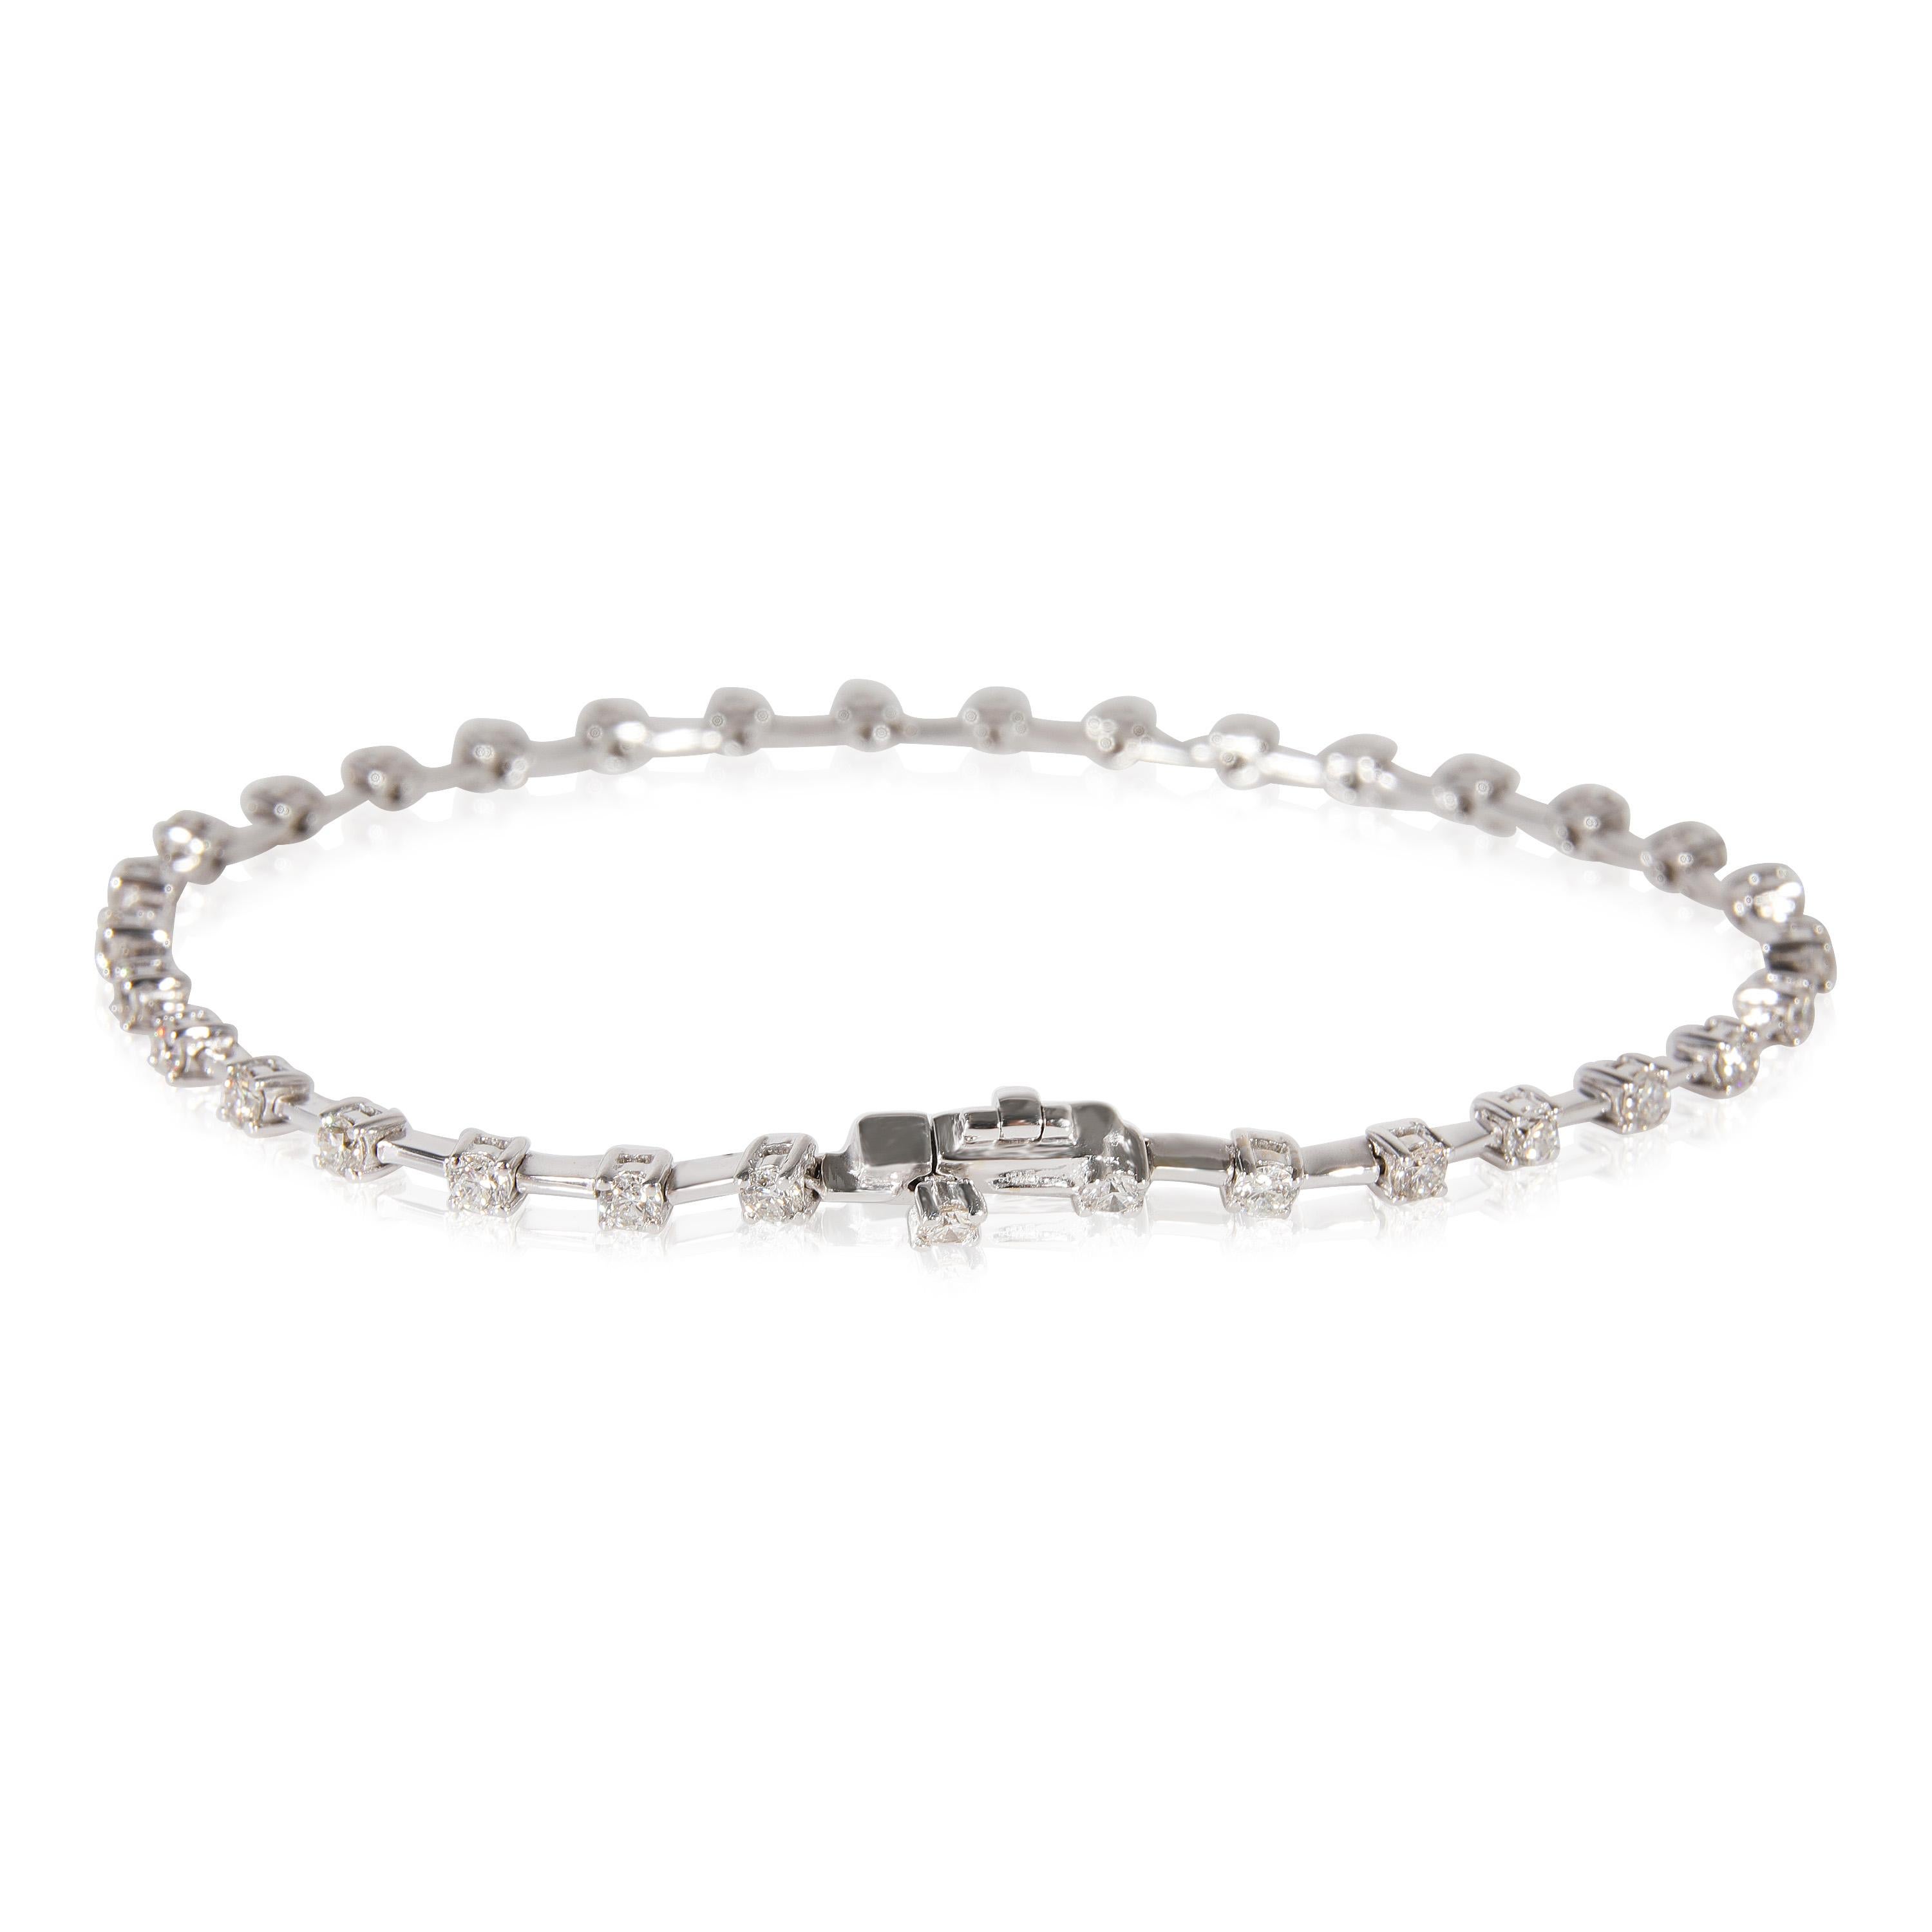 Diamond Tennis Bracelet in 18k White Gold 1.52 CTW

PRIMARY DETAILS
SKU: 121706
Listing Title: Diamond Tennis Bracelet in 18k White Gold 1.52 CTW
Condition Description: Retails for 2995 USD. In excellent condition and recently polished. Chain is 7